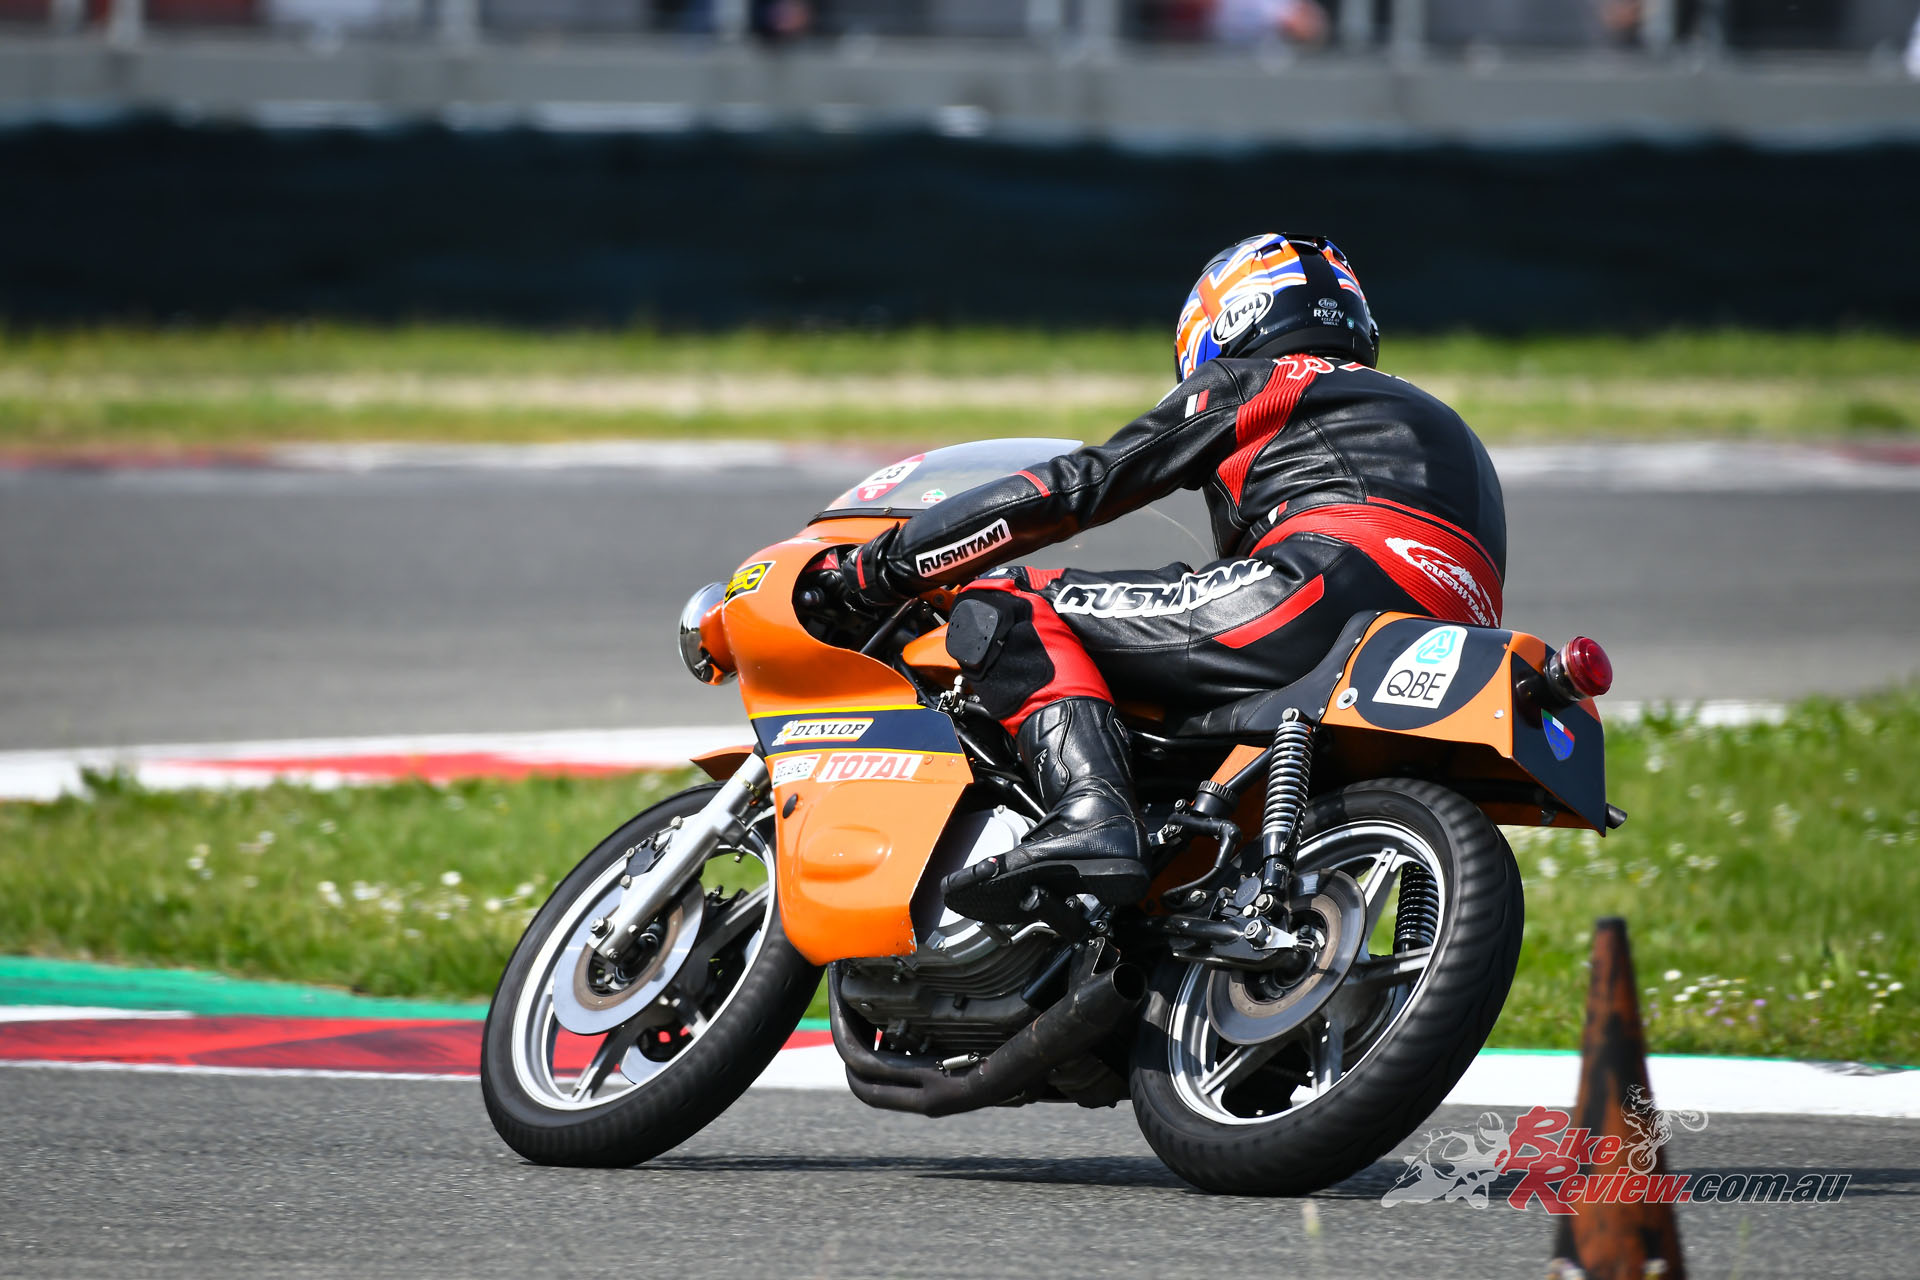 "The 3C 1000 Laverda Spaceframe must have been a fine ride for a 24-hour marathon on big circuits by the standards of the era, especially in damp conditions where the good feedback from the Ceriani suspension would have given added confidence."